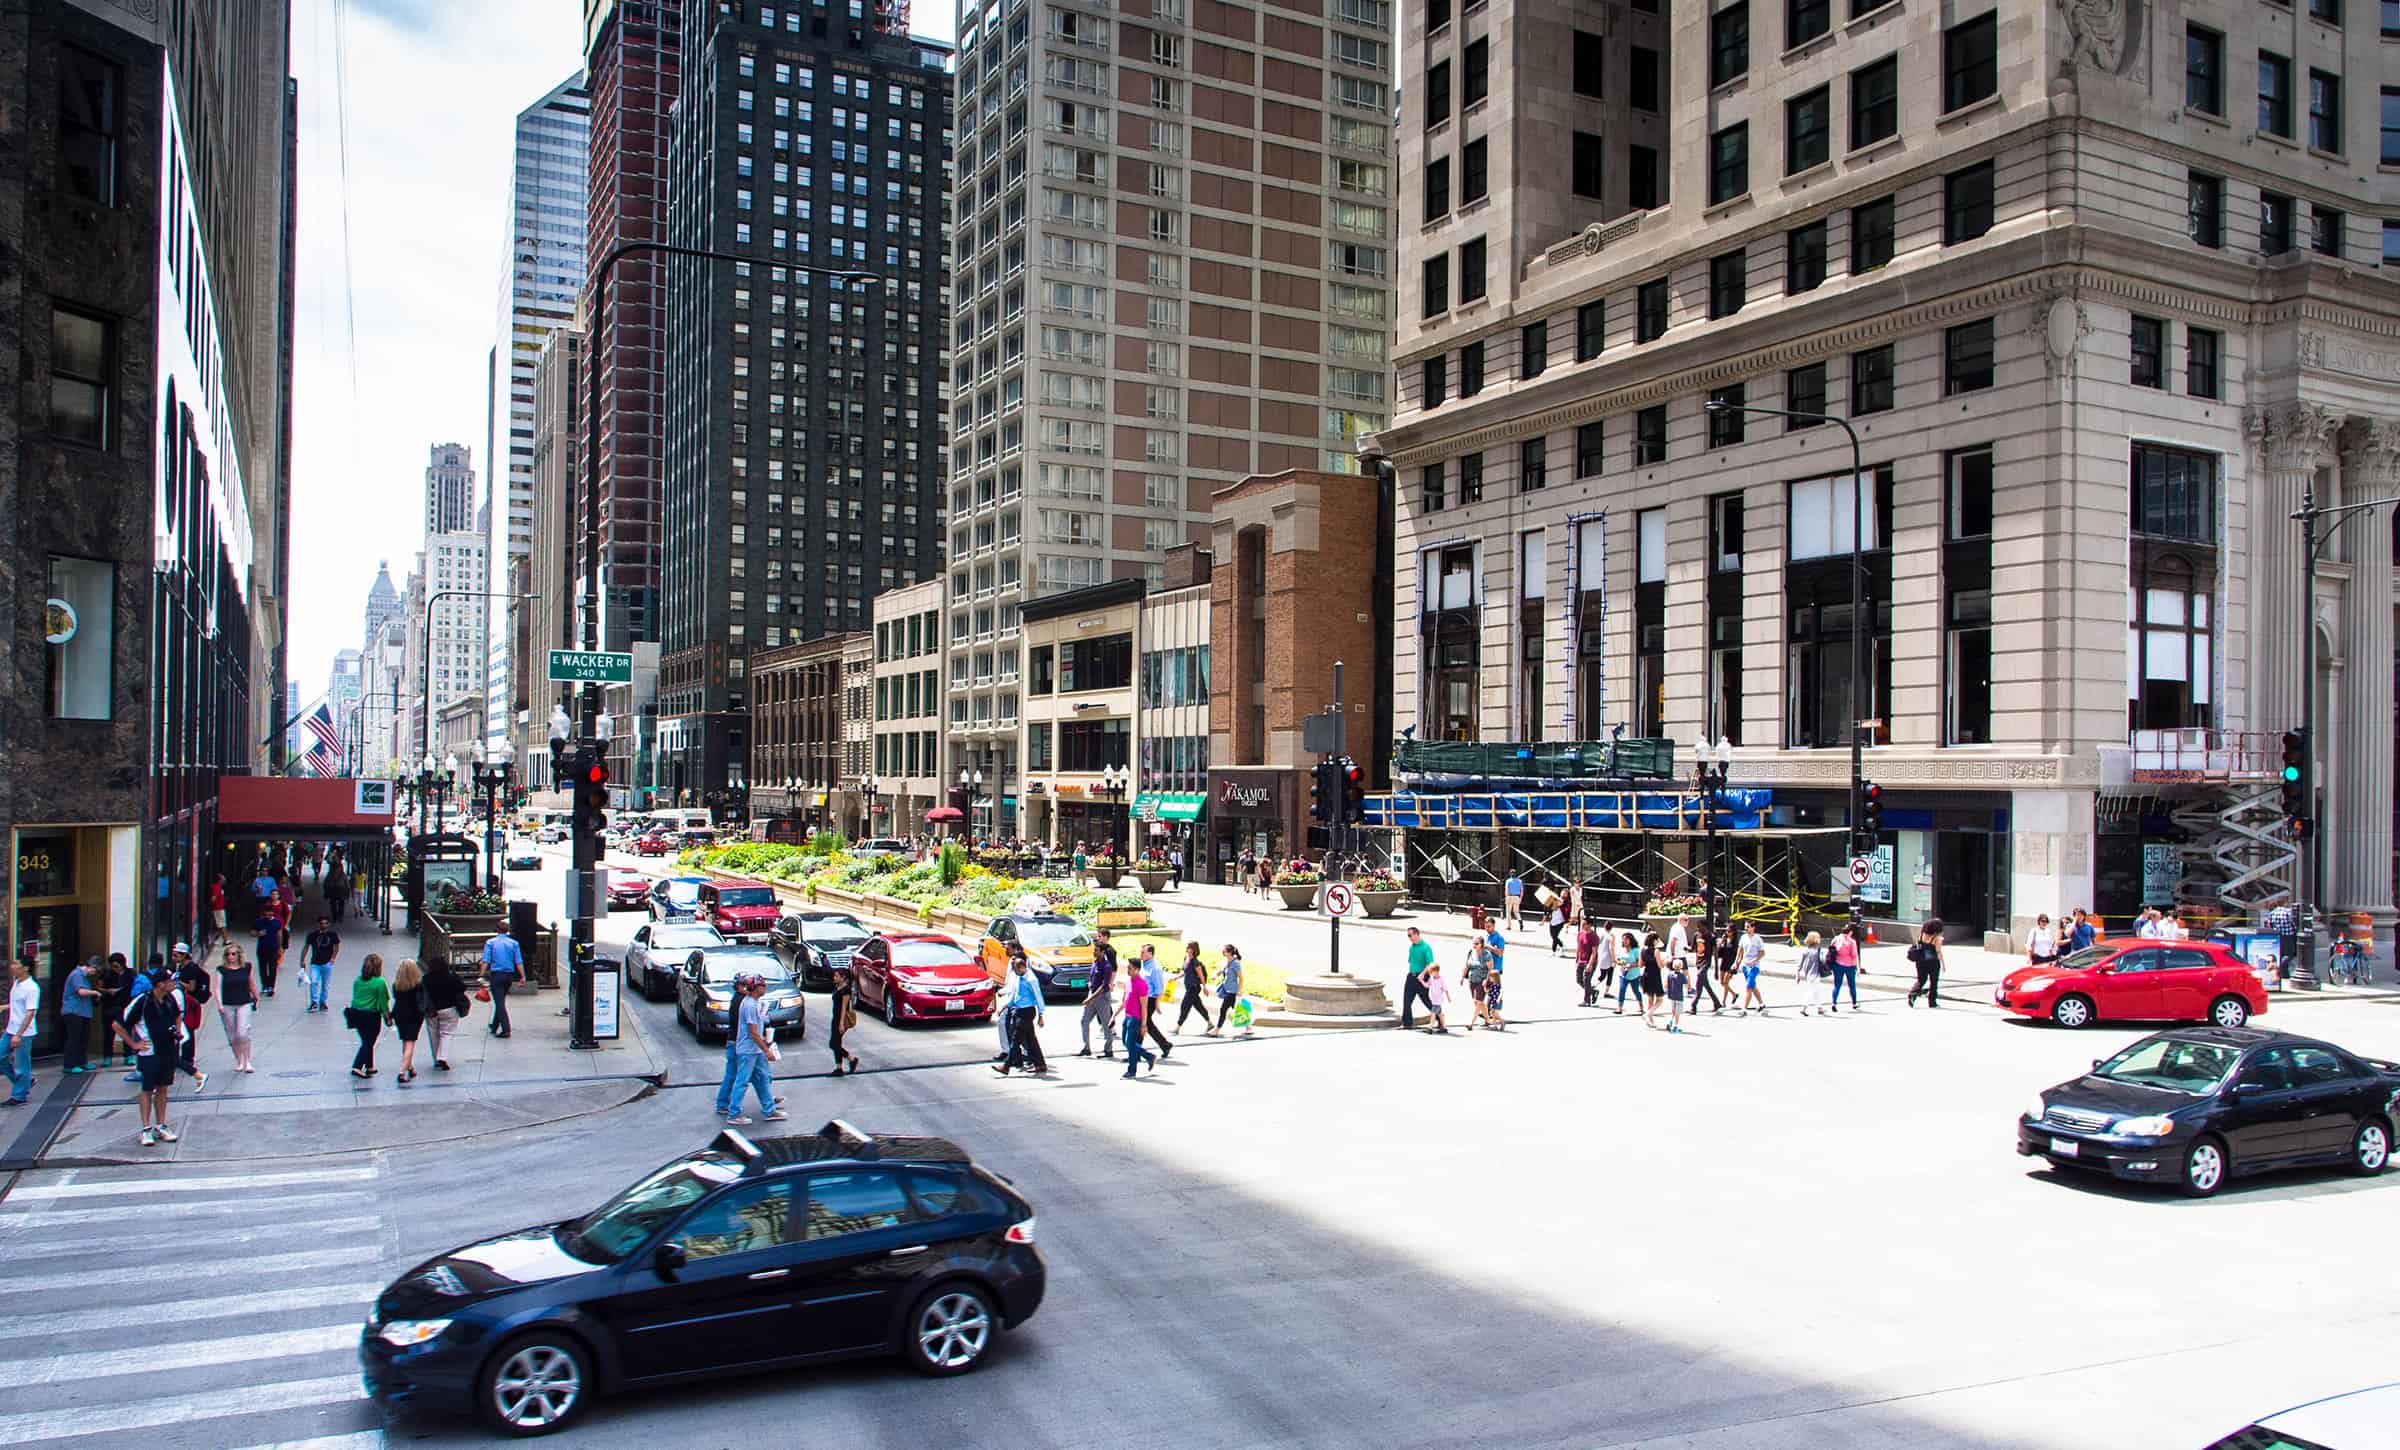 Magnificent Mile in Chicago